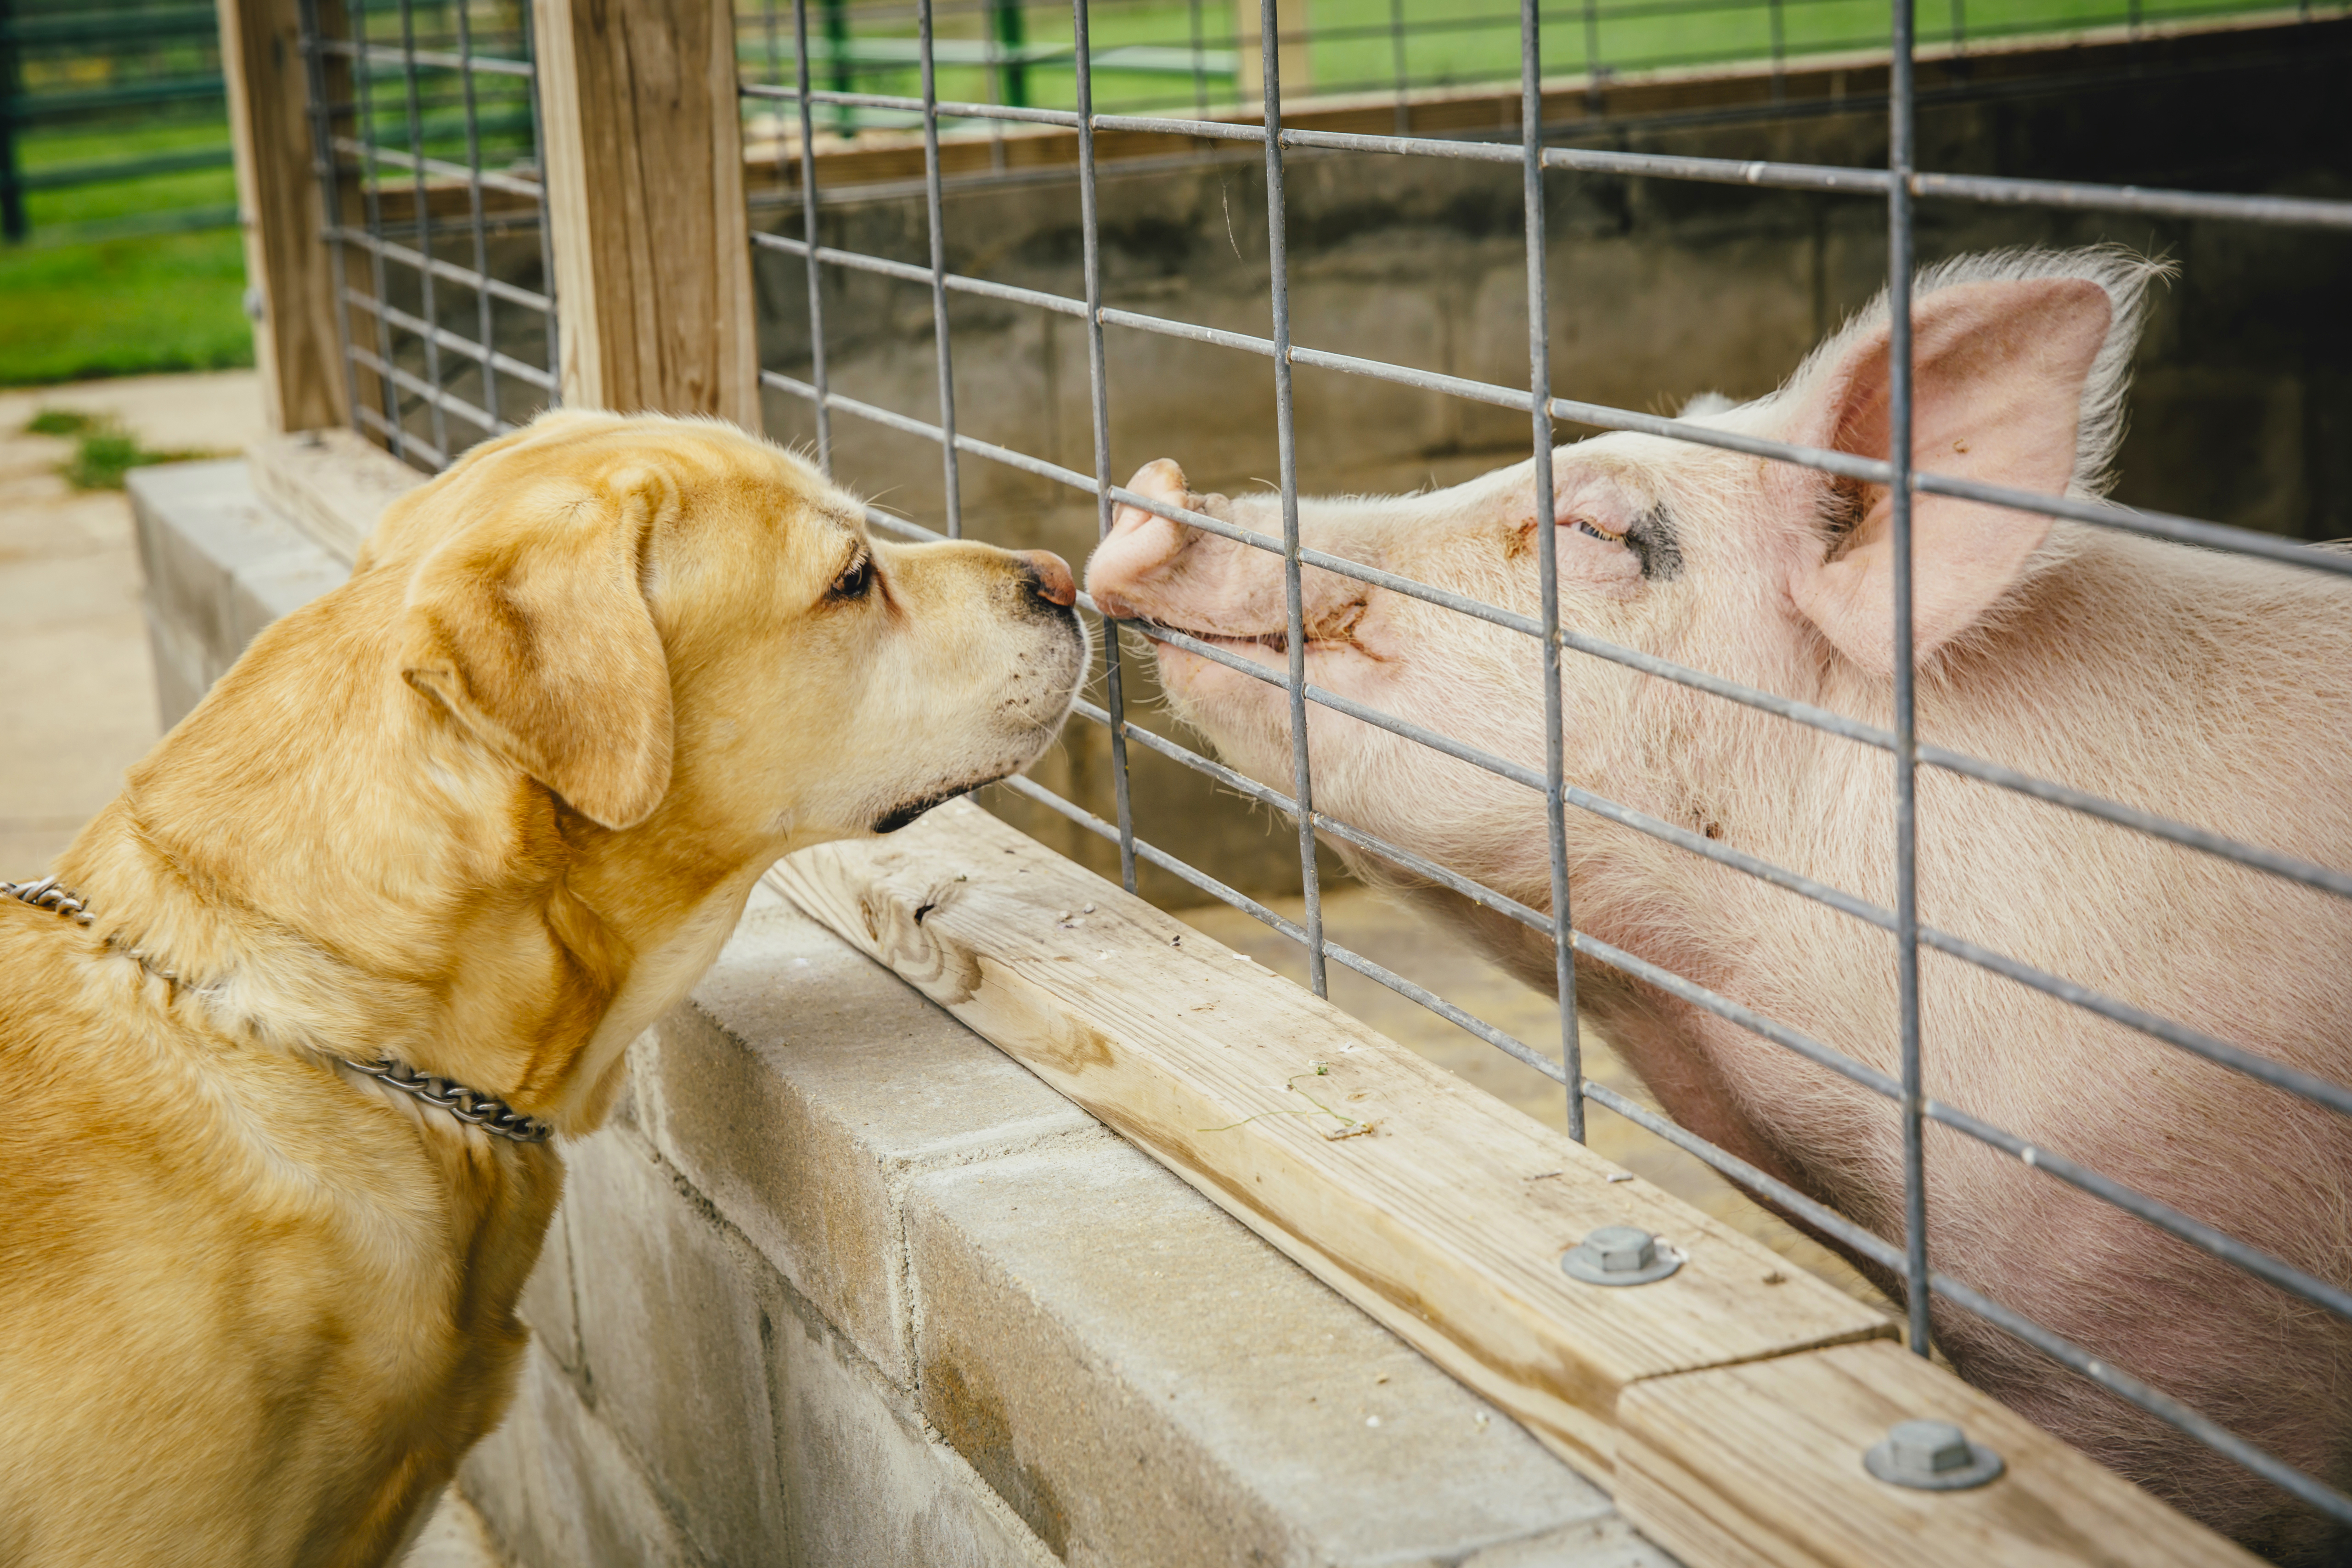 A dog and a pig sniff each other through a fence